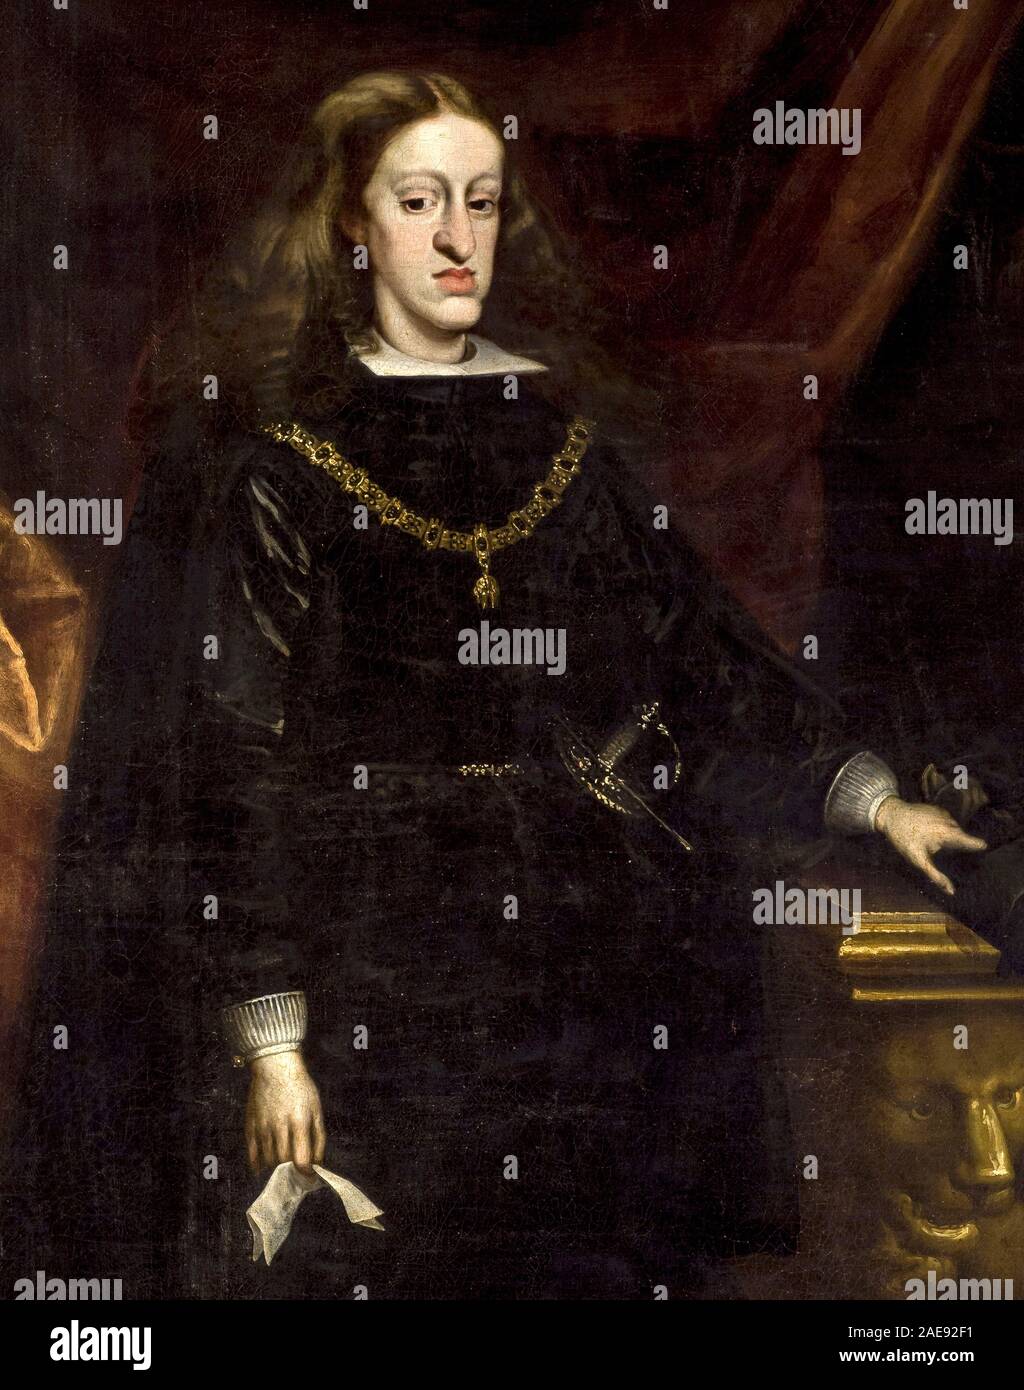 Charles II of Spain. Charles II (1661 – 1700), King of Spain, also known as El Hechizado or the Bewitched, was the last Habsburg ruler of the Spanish Empire. He is now best remembered for his physical disabilities, and the war for his throne that followed his death. Portrait by Juan Carreño de Miranda, c. 1685 Stock Photo